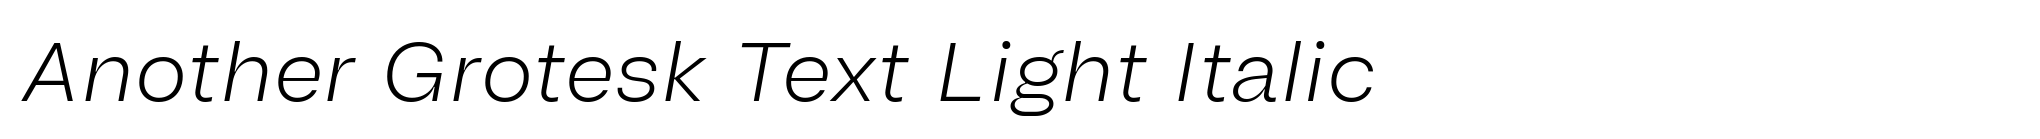 Another Grotesk Text Light Italic image